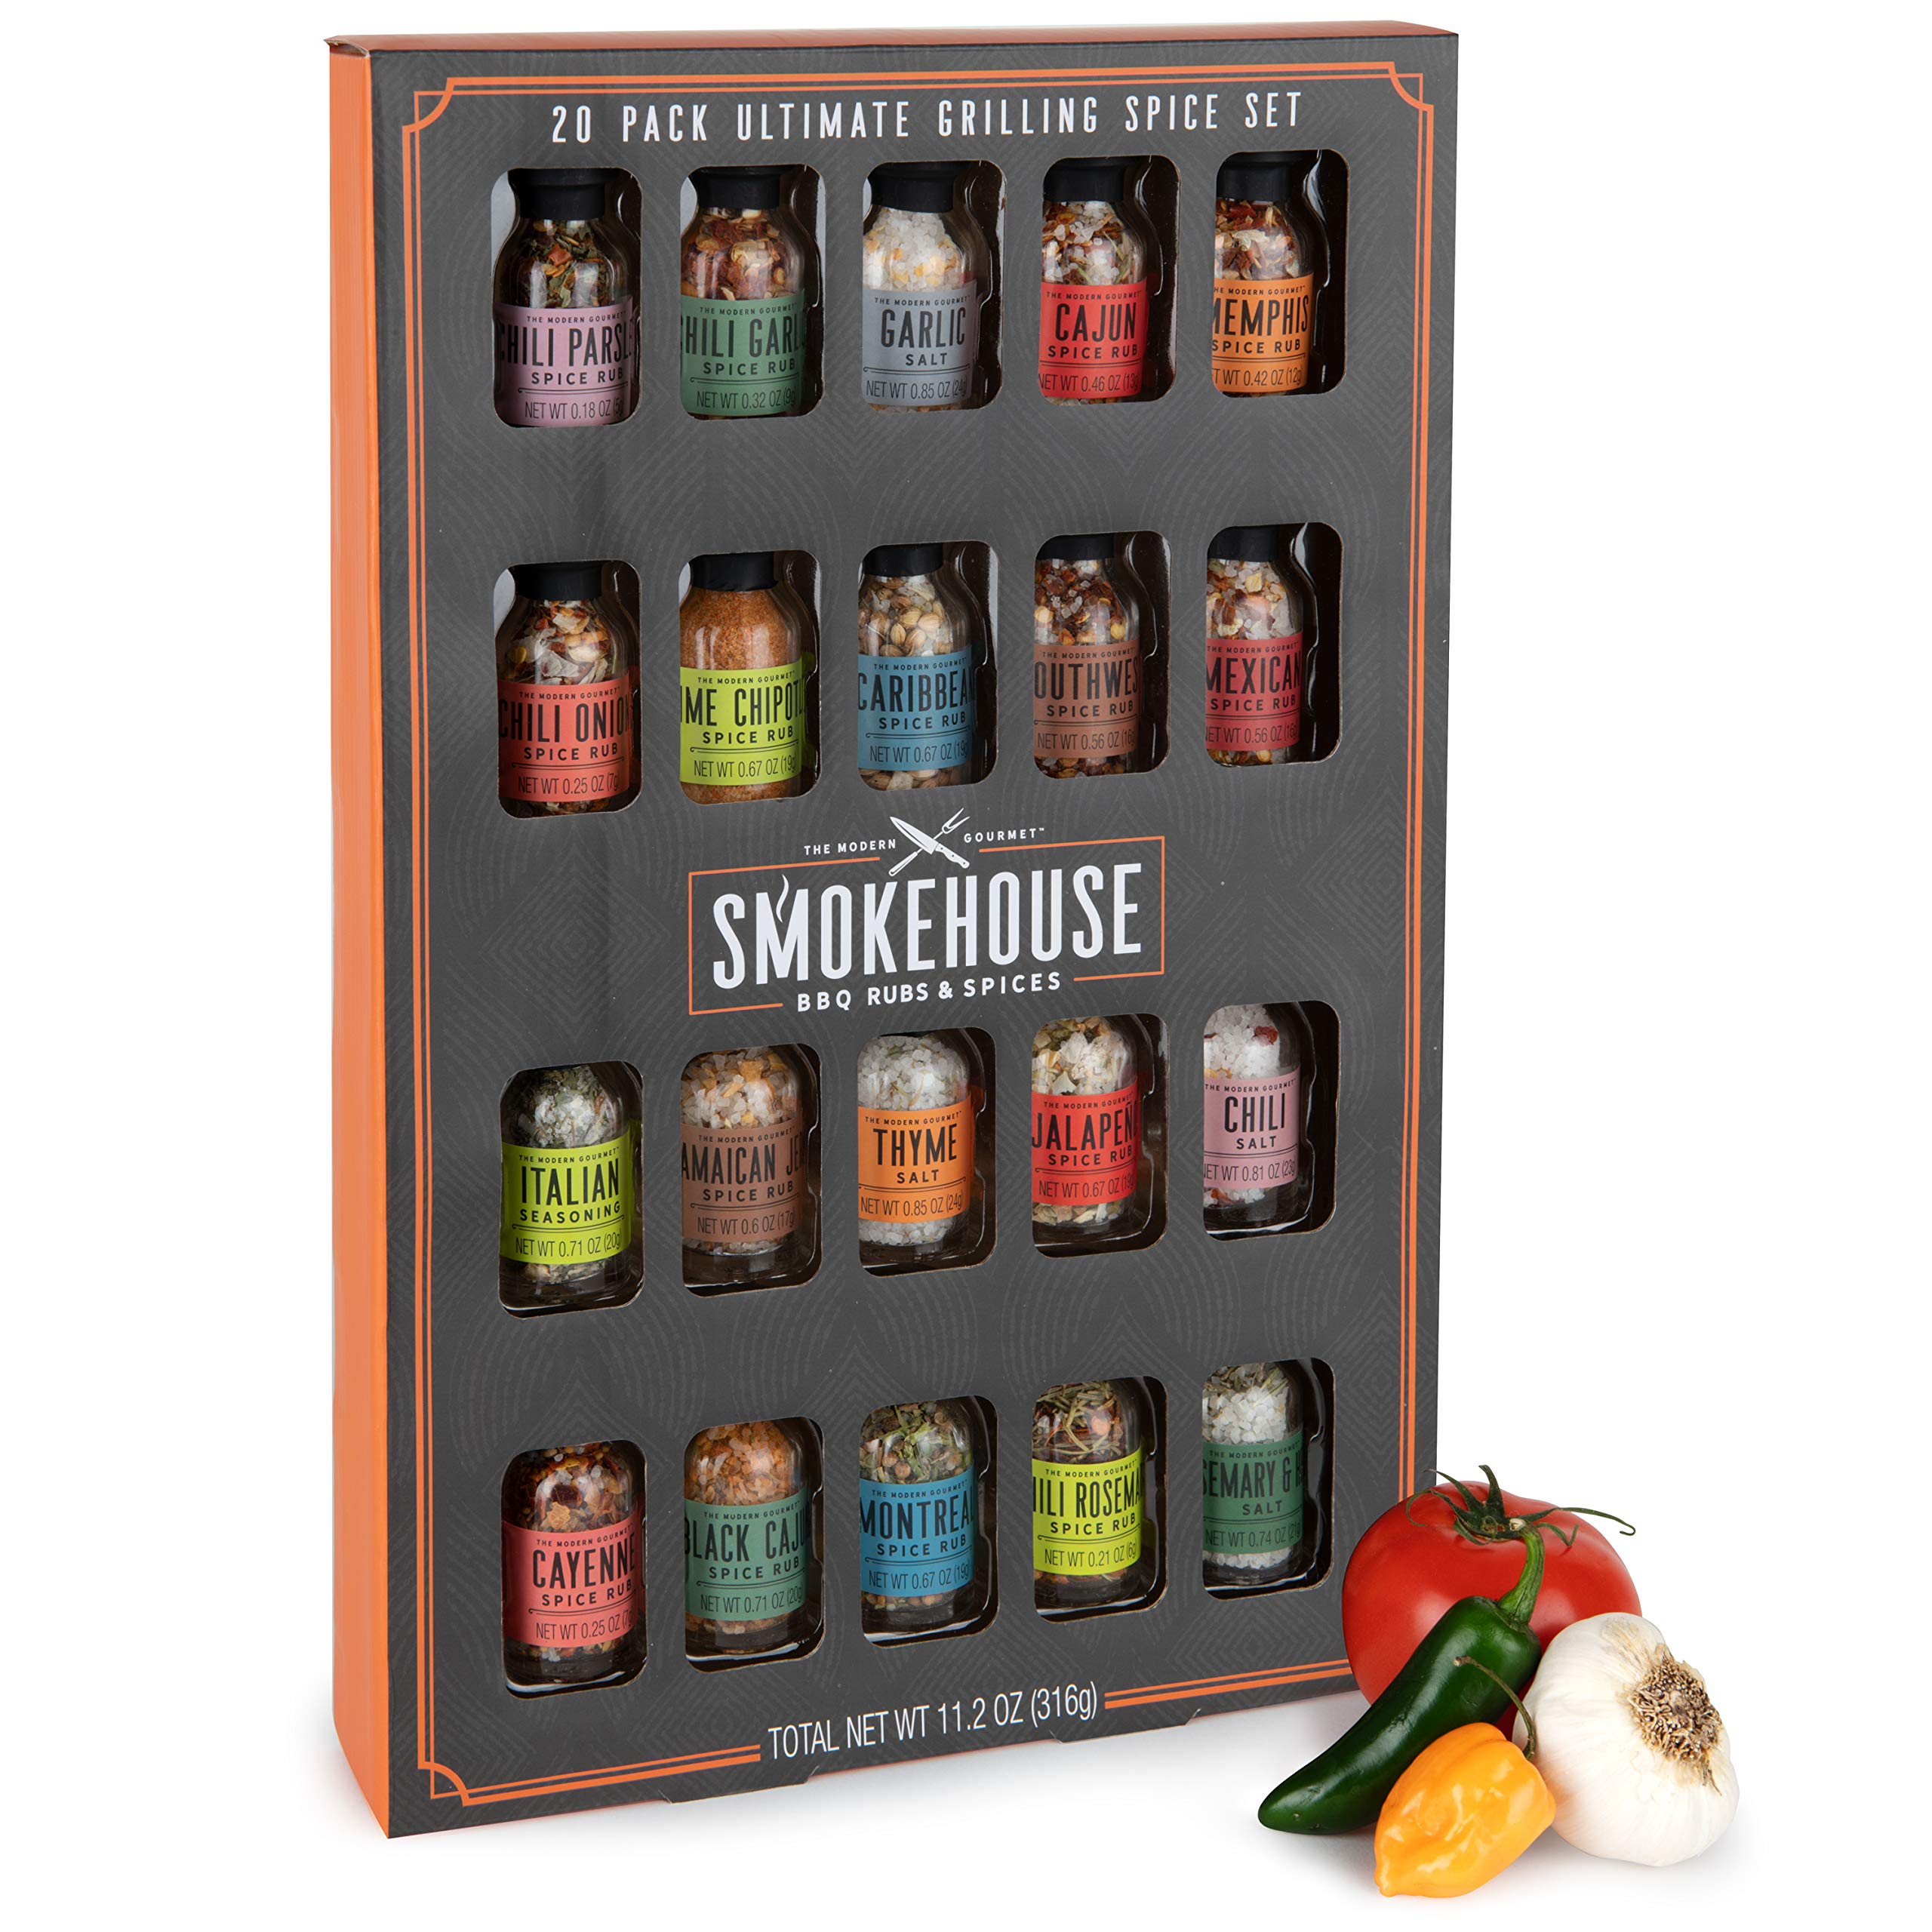 Smokehouse by Thoughtfully Ultimate Grilling Spice Set, Grill Seasoning  Gift Set Flavors Include Chili Garlic, Rosemary and Herb, Lime Chipotle,  Cajun Seasoning and More, Pack of 20